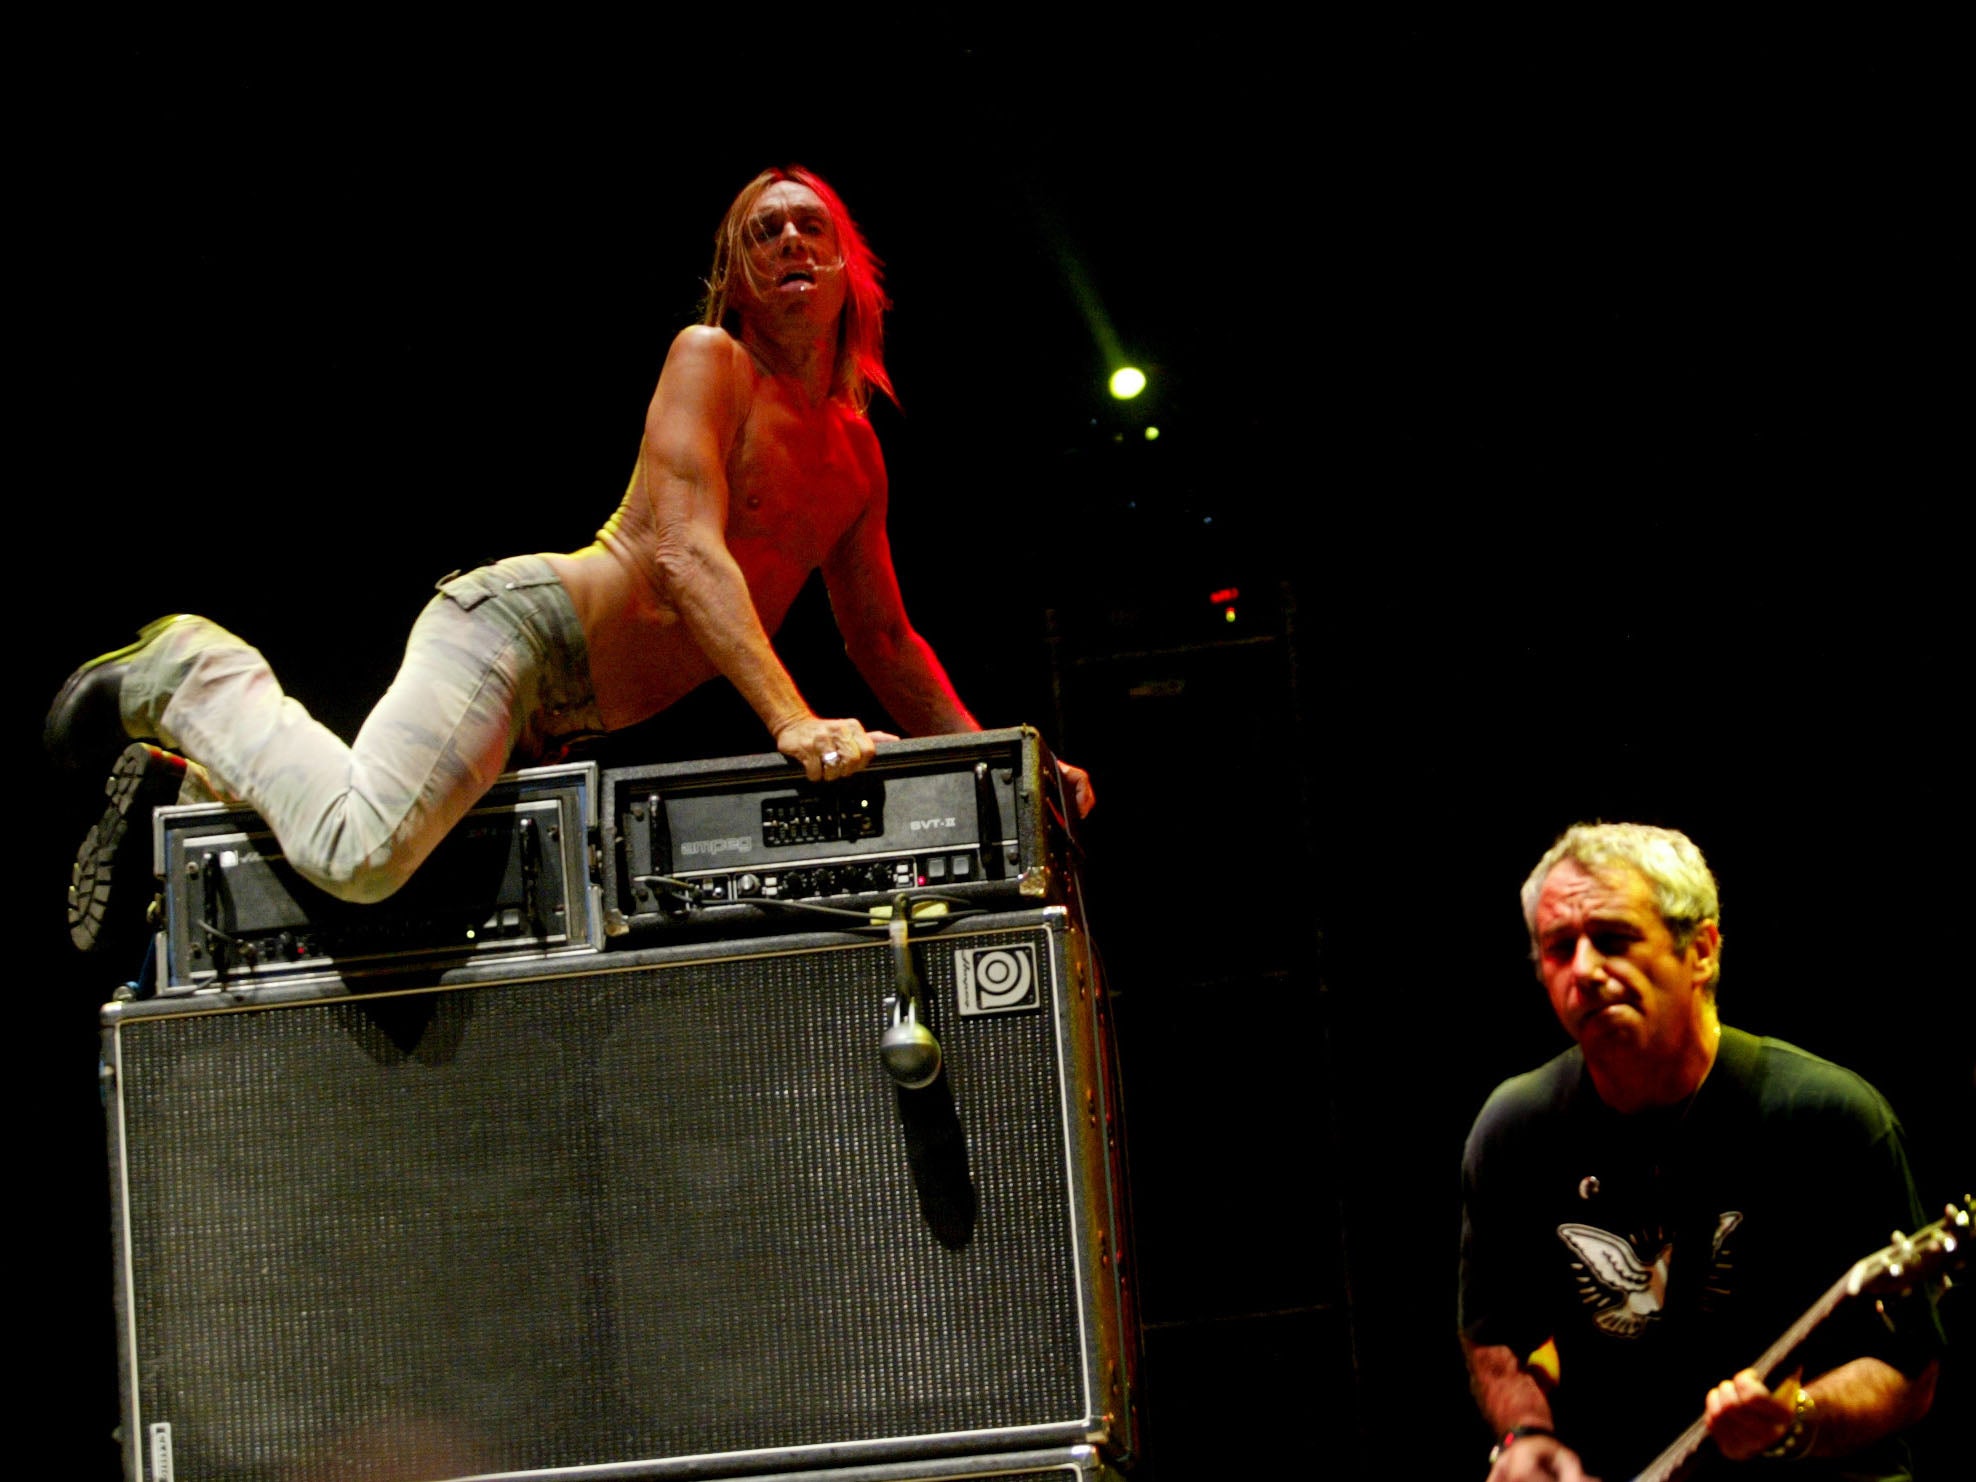 Rock star Iggy Pop performs with The Stooges